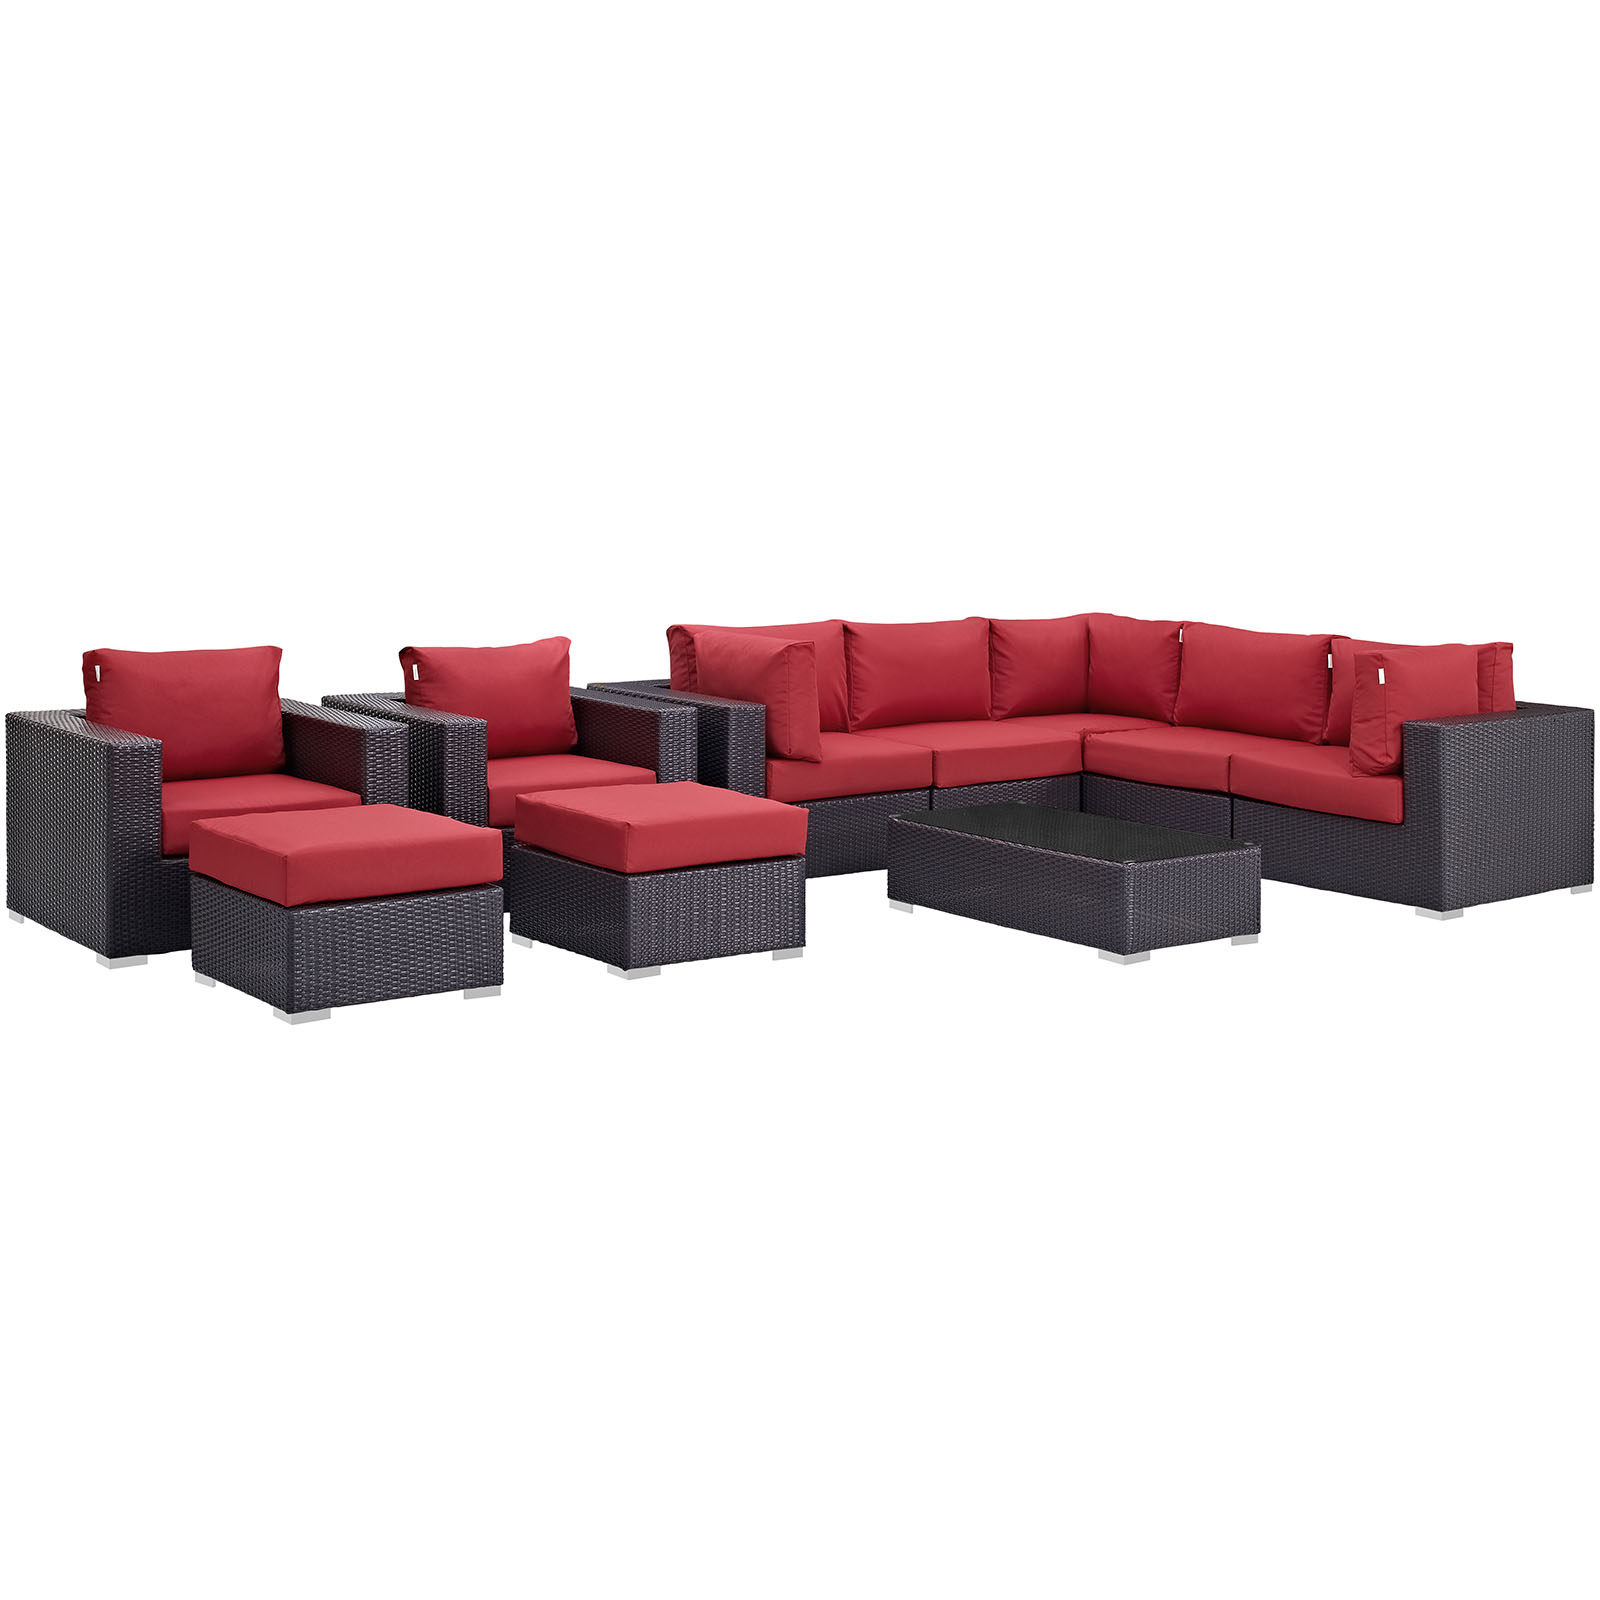 Modway Convene 10 Piece Outdoor Patio Sectional Set in Espresso Red - image 2 of 9